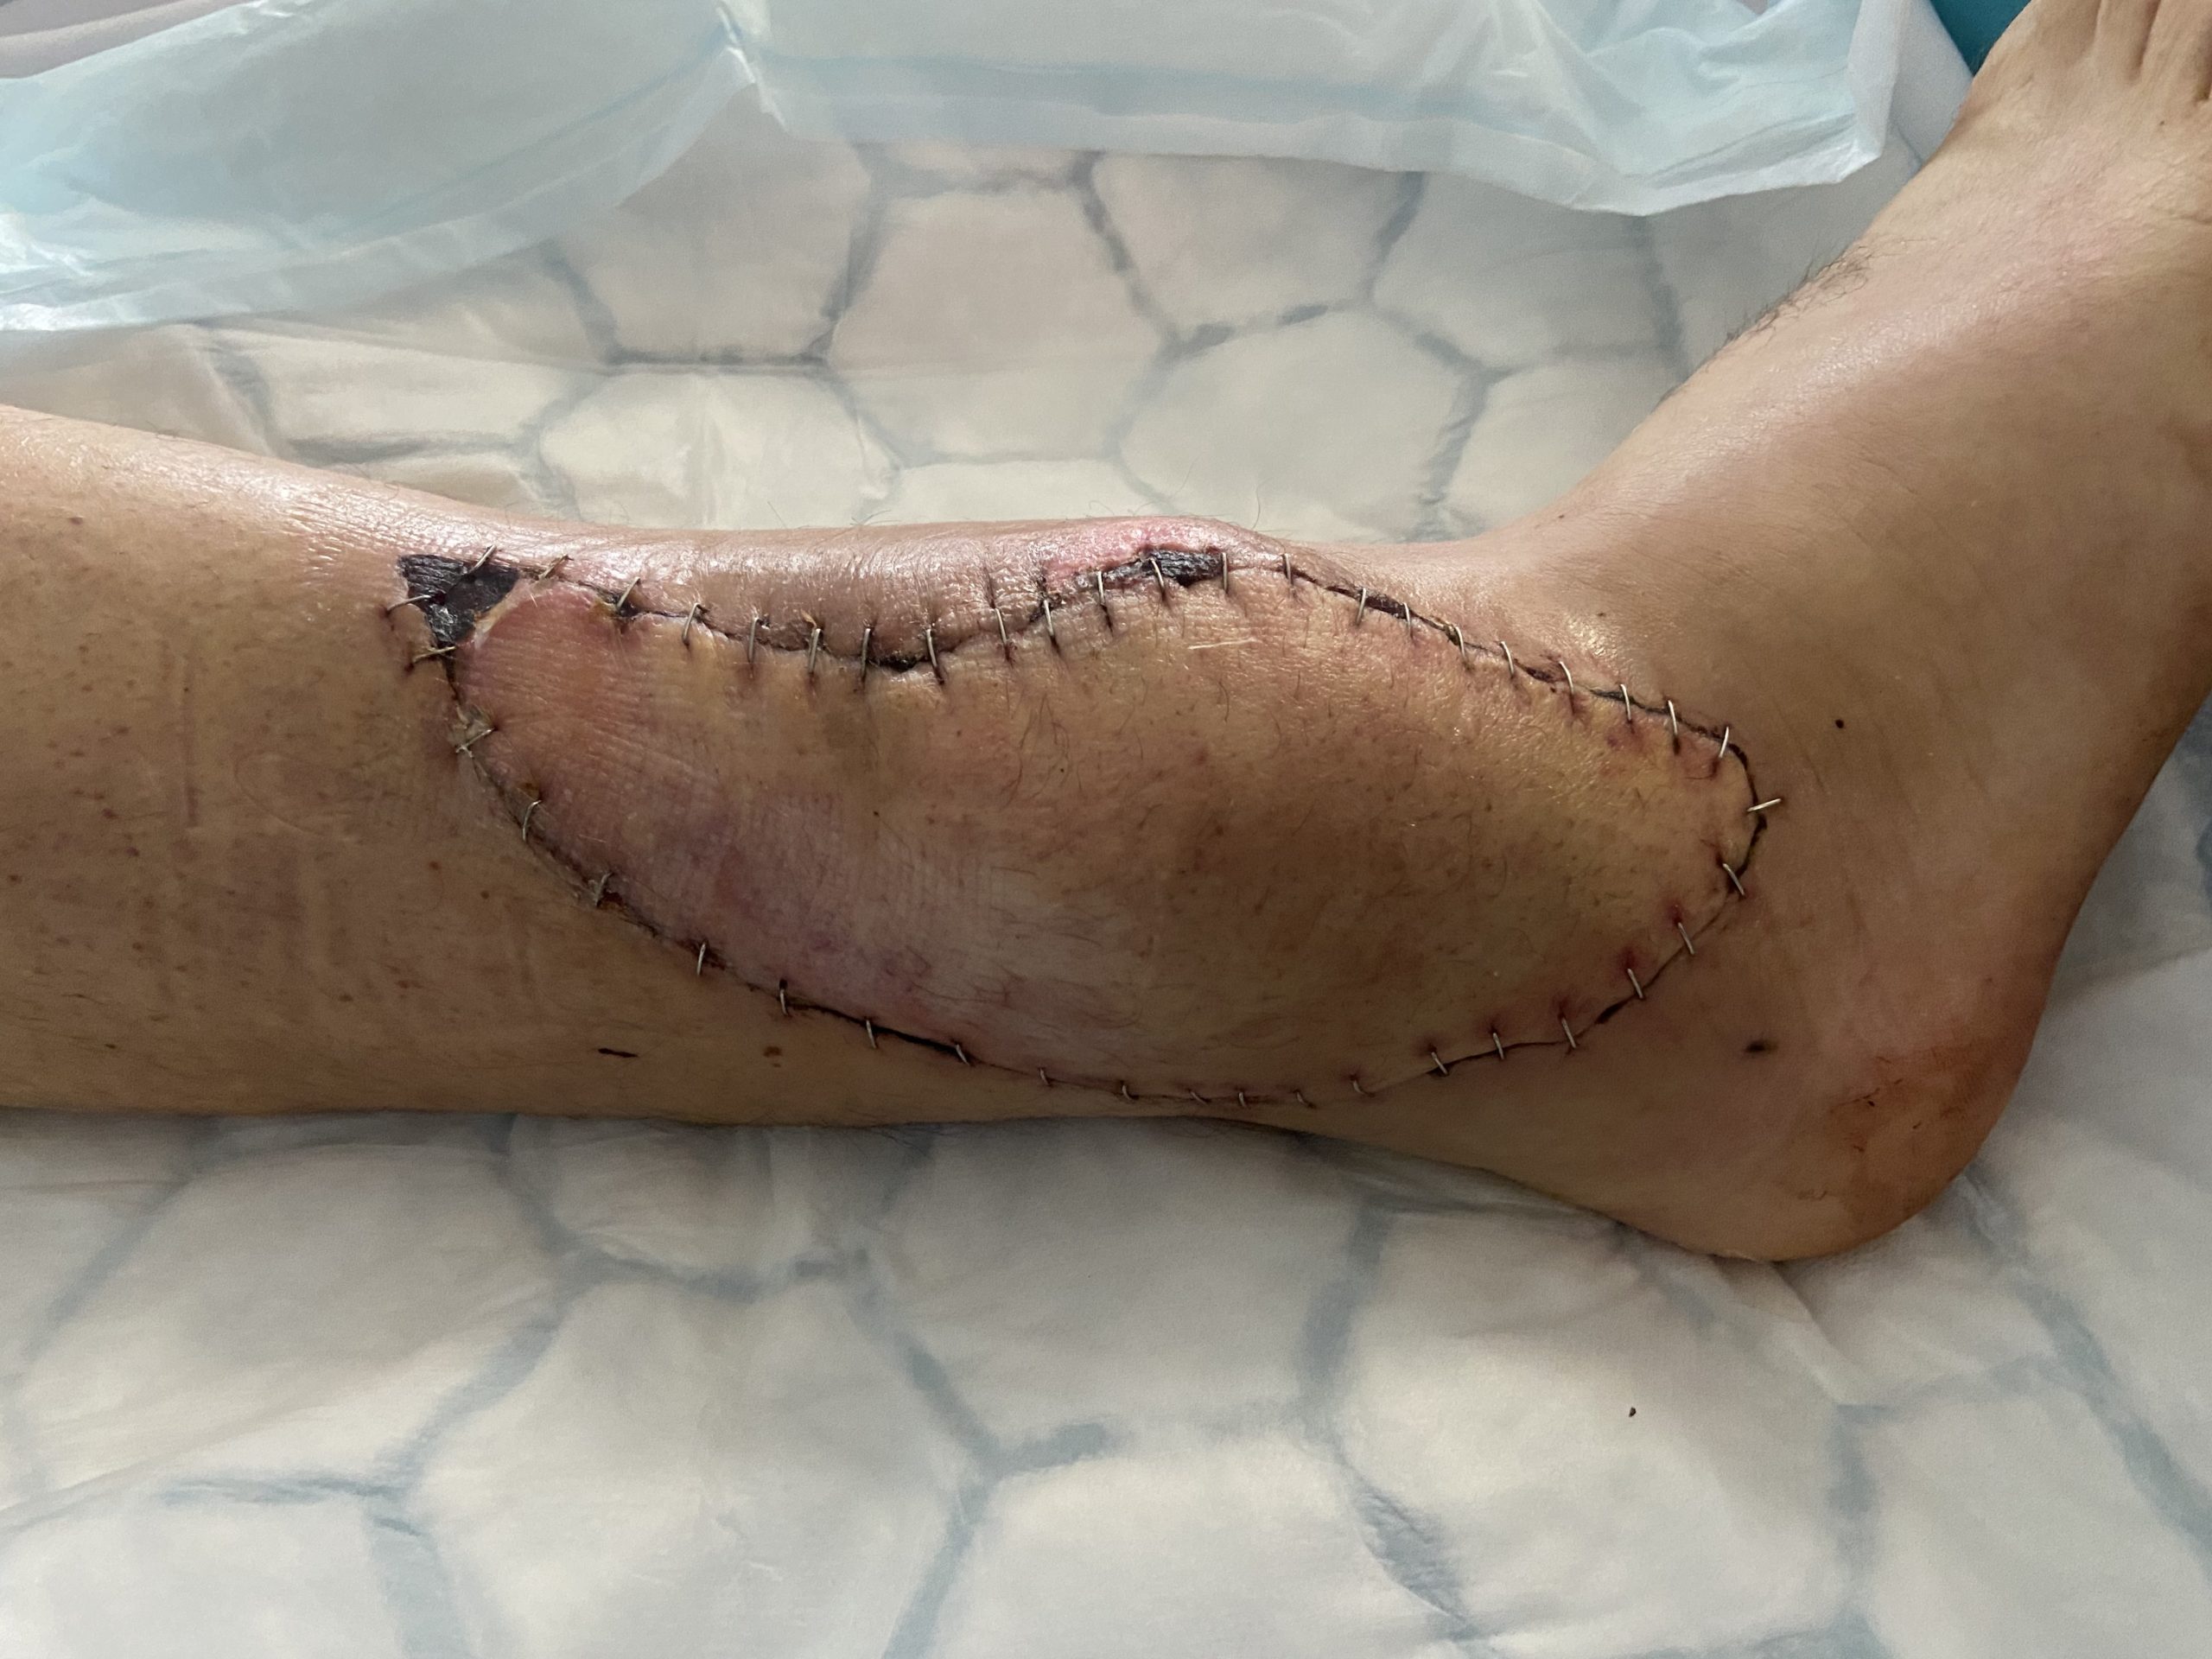 An ankle post-surgery.